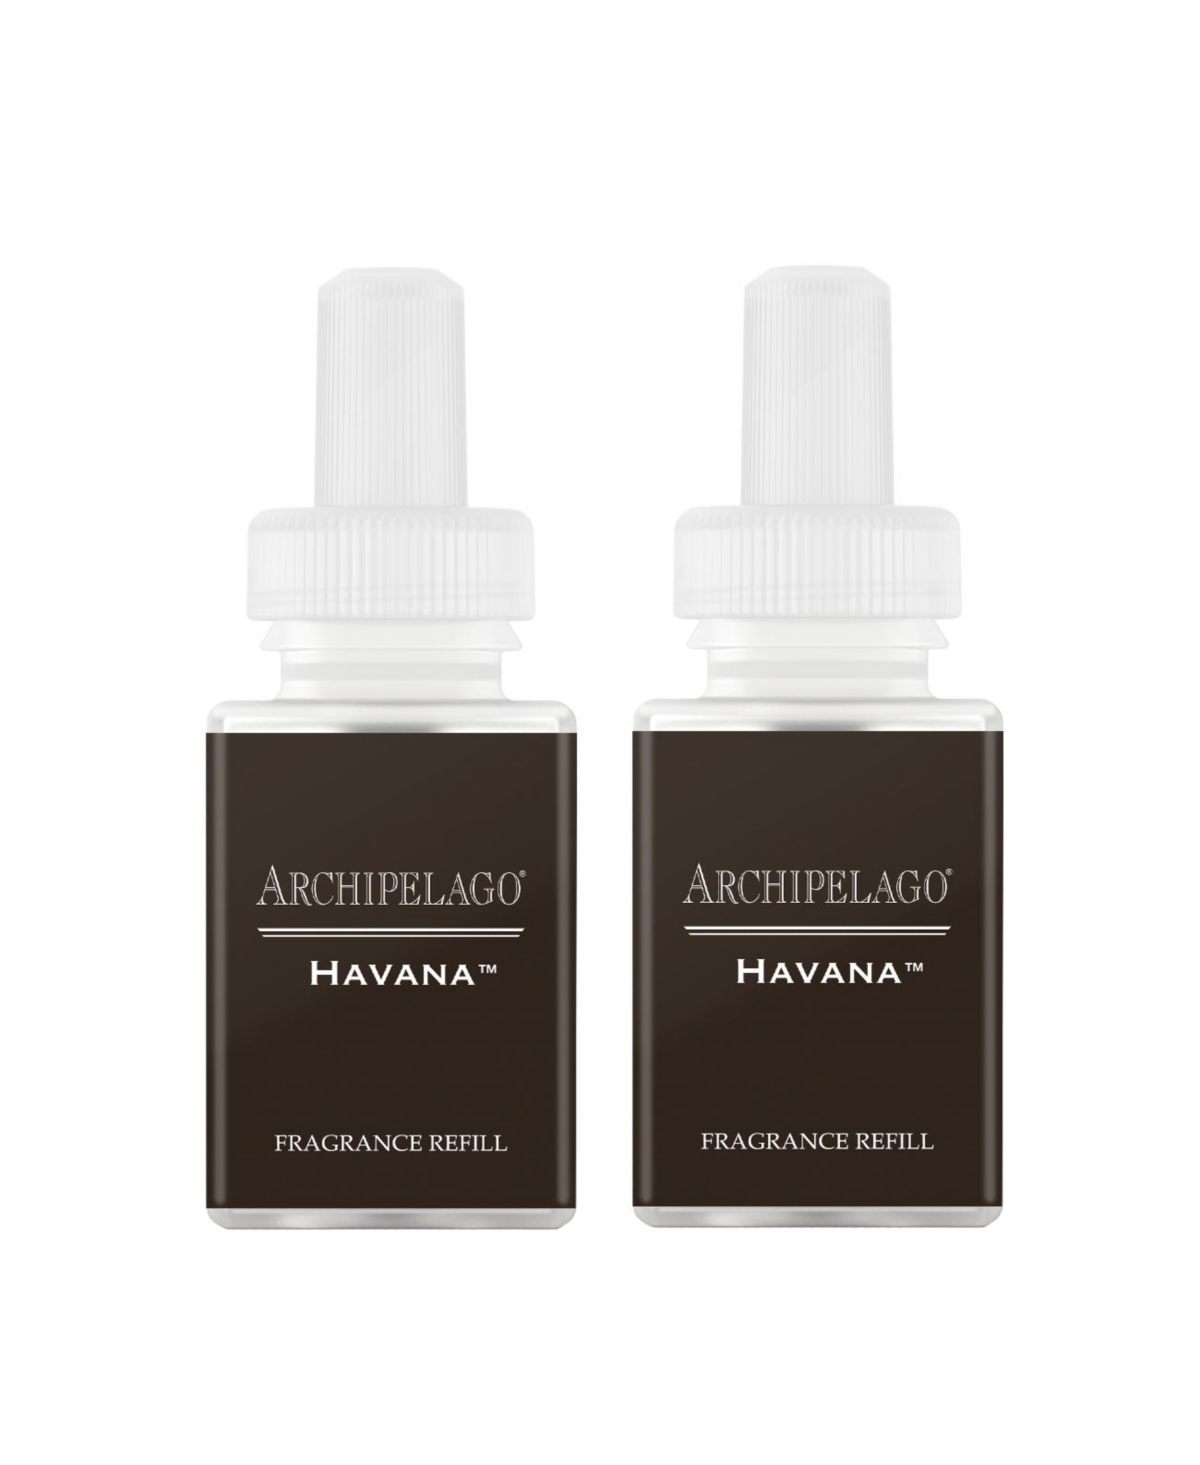 and Archipelago - Havana - Fragrance for Smart Home Air Diffusers - Room Freshener - Aromatherapy Scents for Bedrooms & Living Rooms - 2 Pack